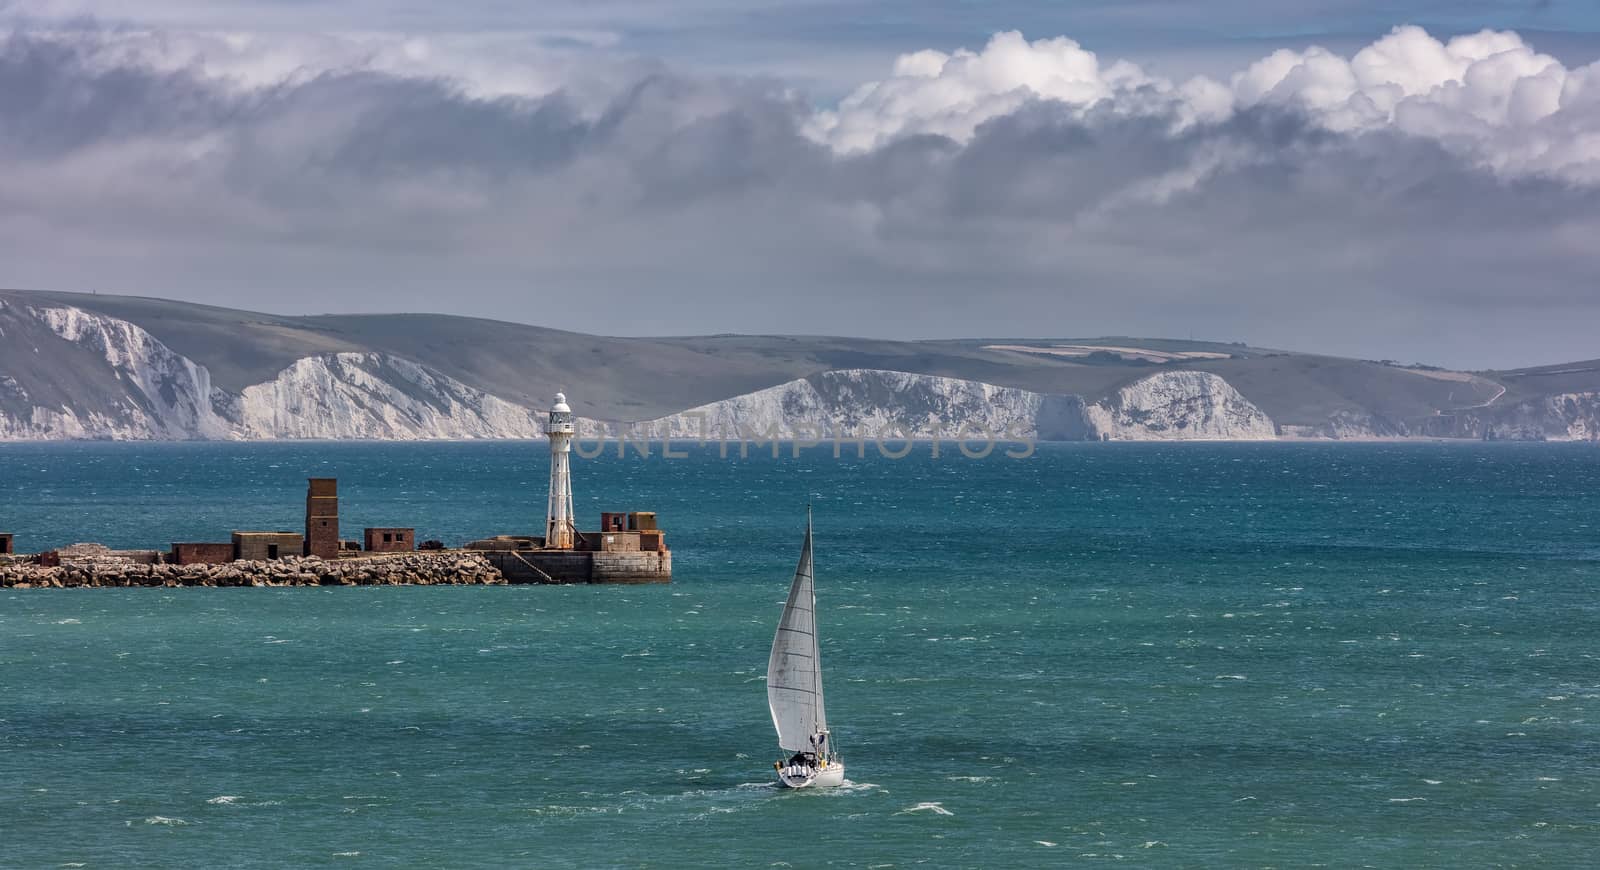 High angle shot of a white sailboat sailing in Weymouth Bay, UK. Coast line with white cliffs and cloudy sky in the background. Lighthouse at the harbour entrance. Sport and recreation concept. Panorama size.